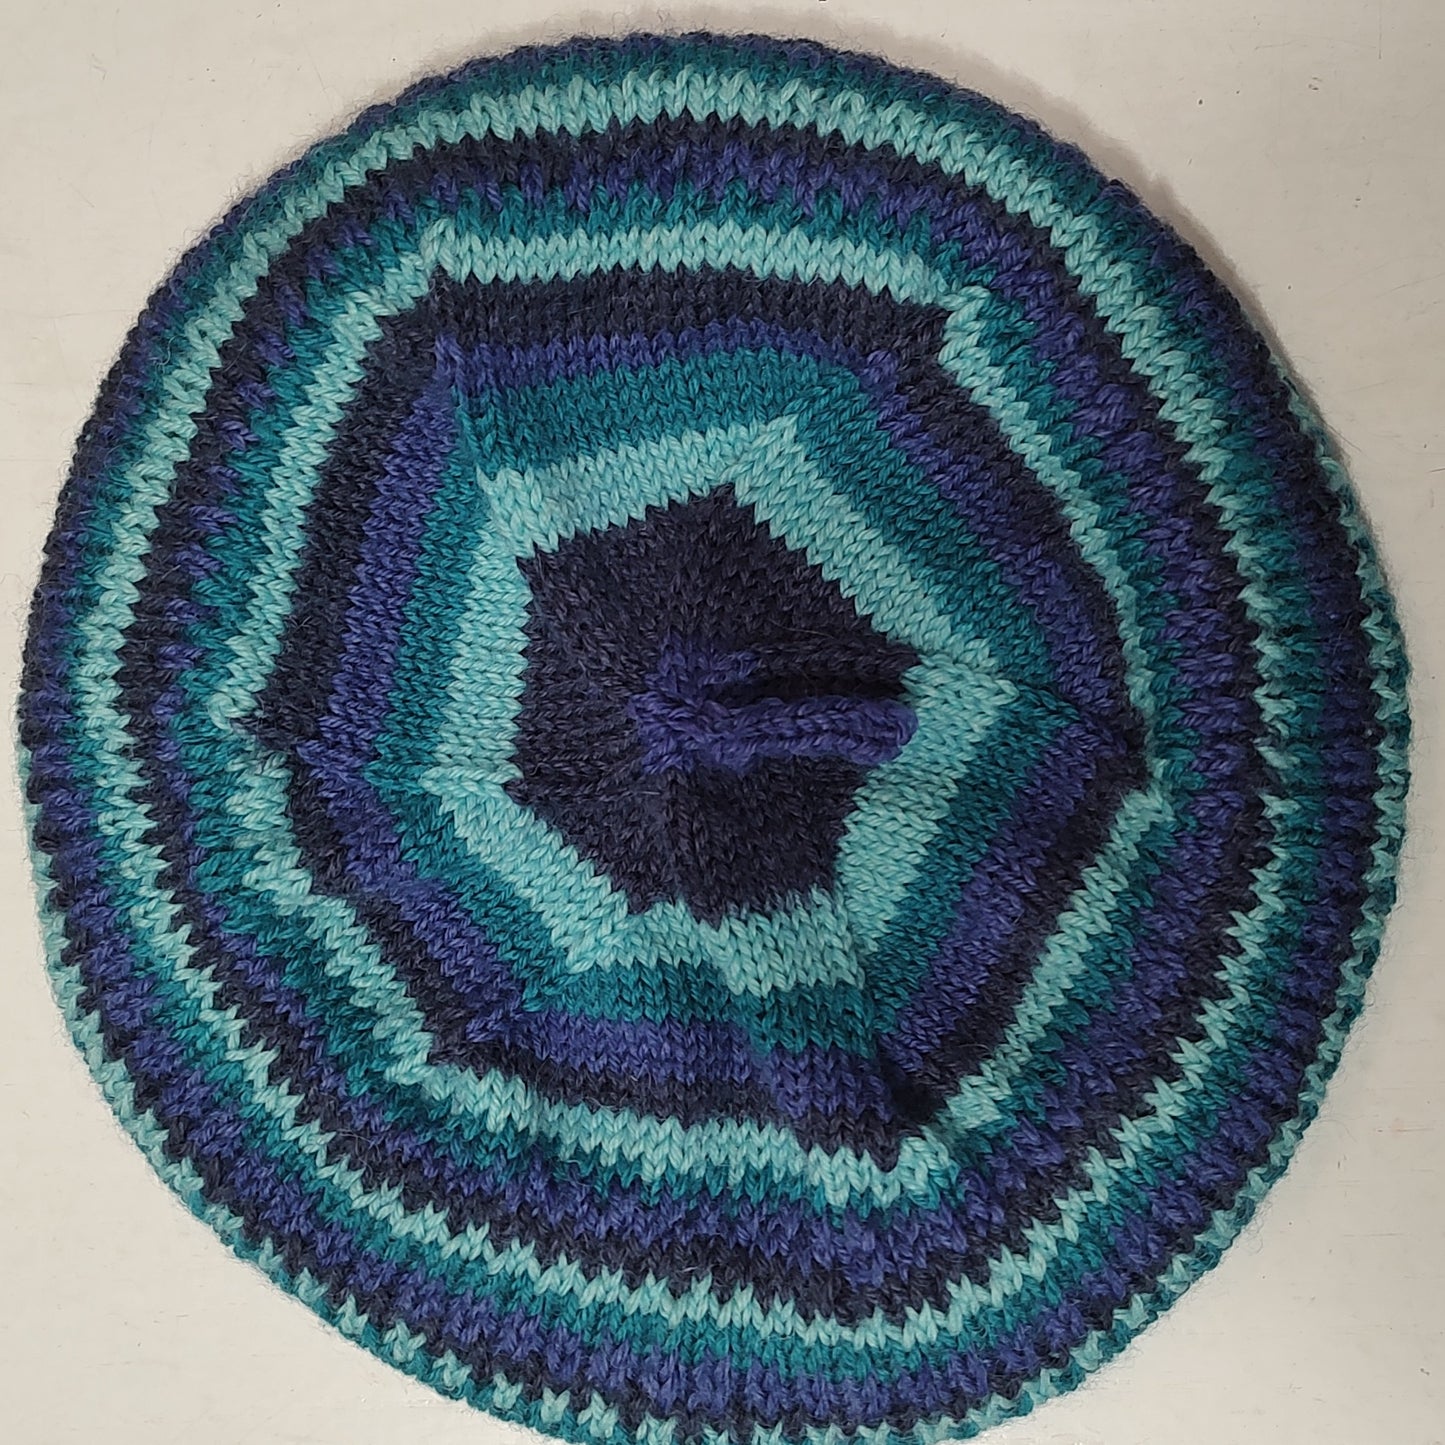 Knitted Hat - striped beret